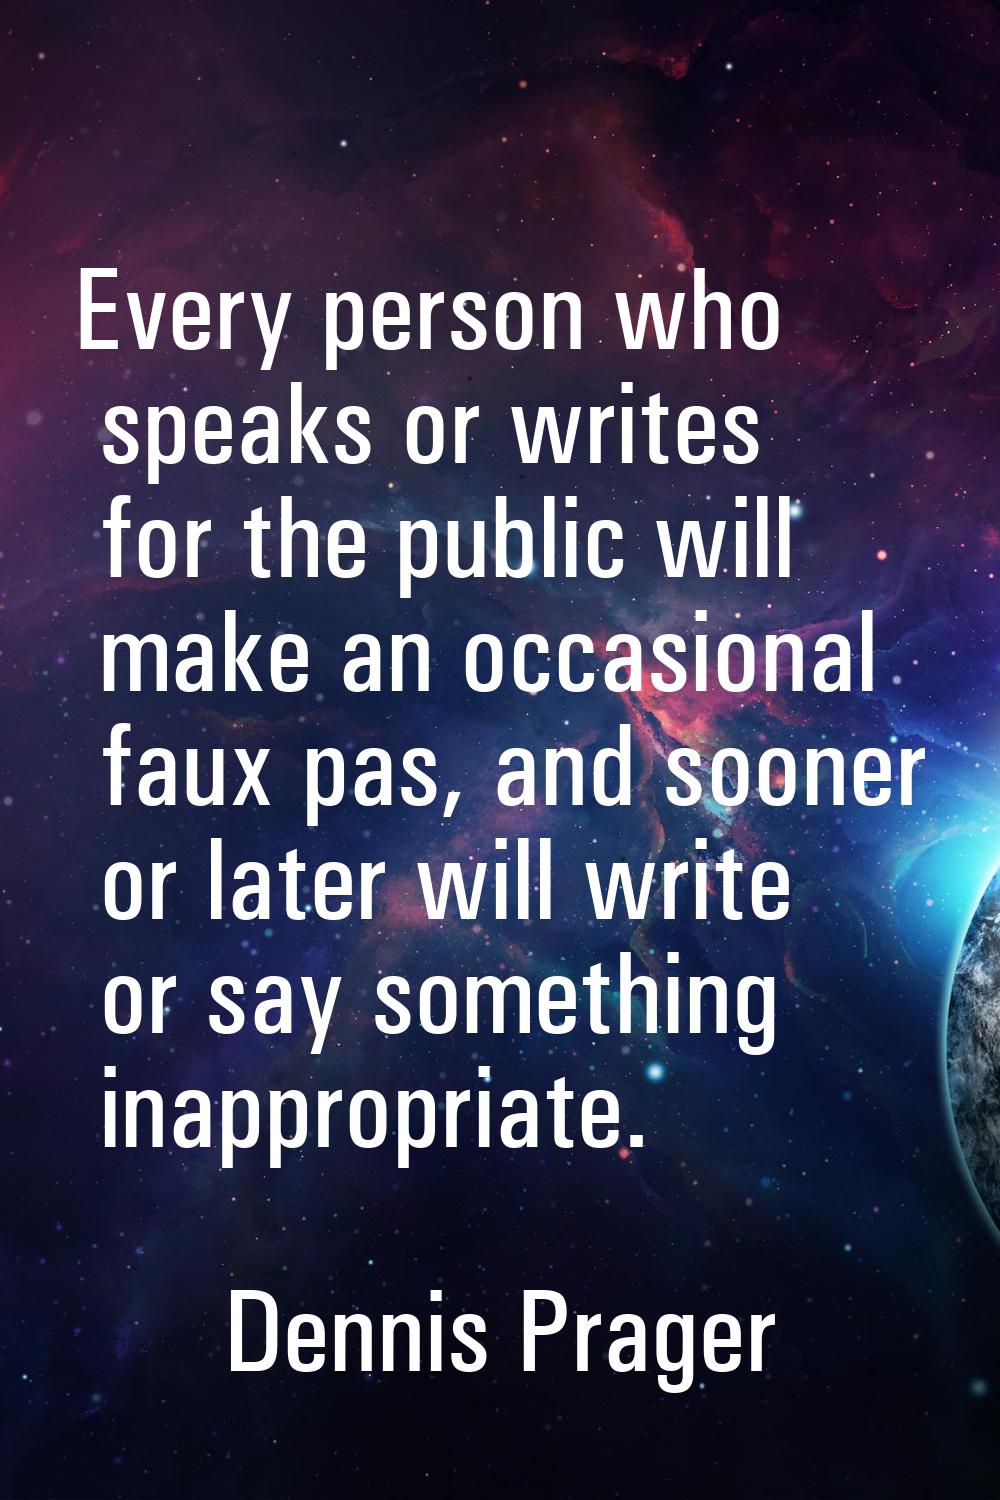 Every person who speaks or writes for the public will make an occasional faux pas, and sooner or la